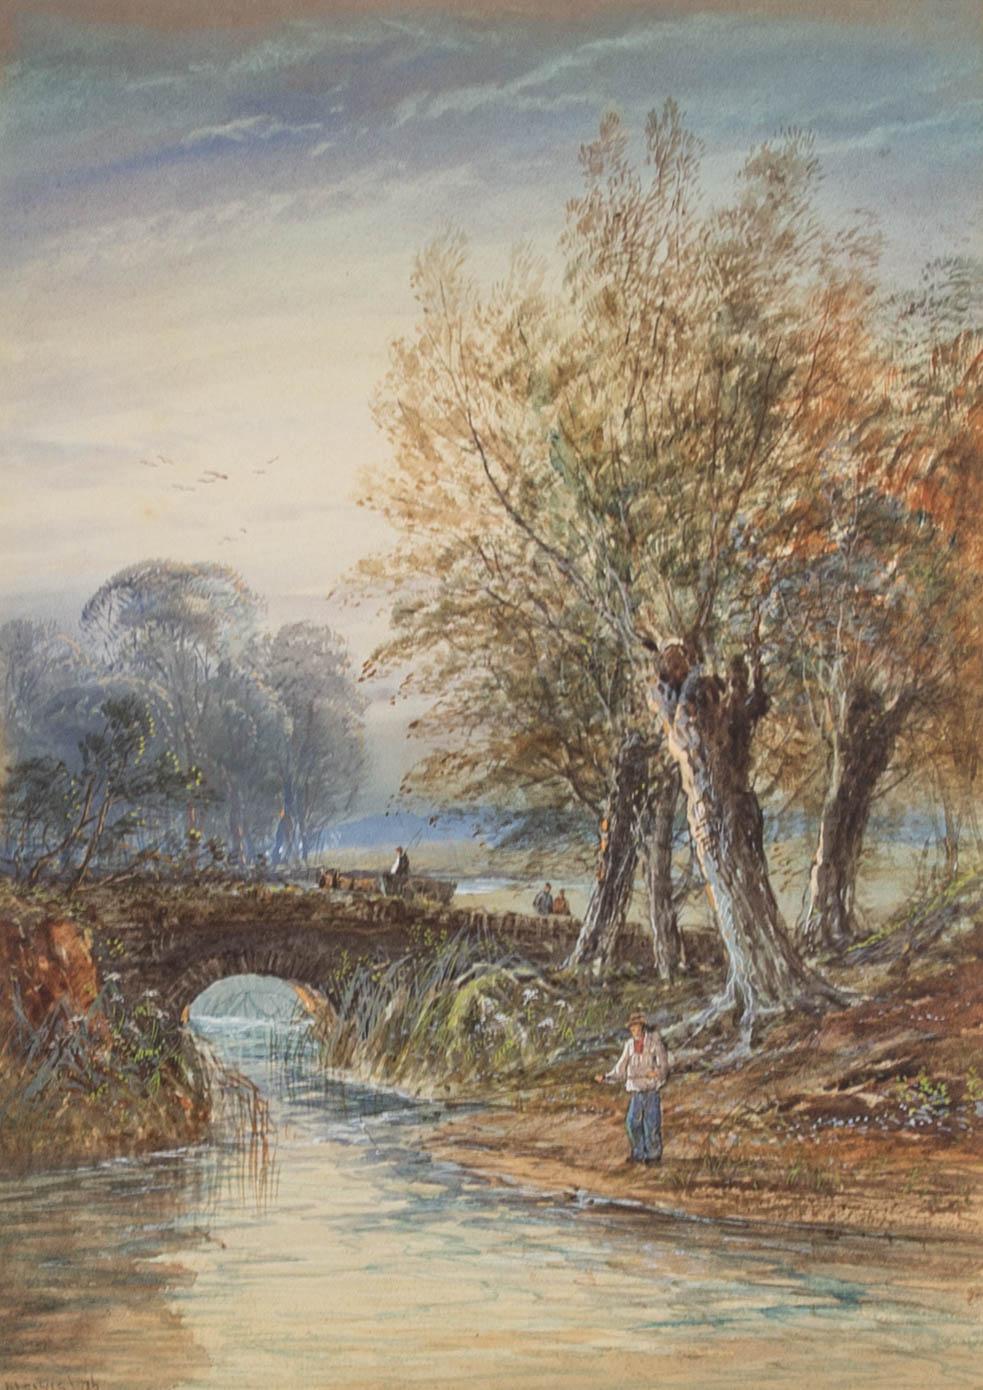 A fine watercolour painting with gouache details by the well-listed artist Lennard Lewis RA, depicting a rural landscape scene with a fisherman and an arch-bridge. Signed and dated to the lower left-hand corner. Well-presented in a wash line card